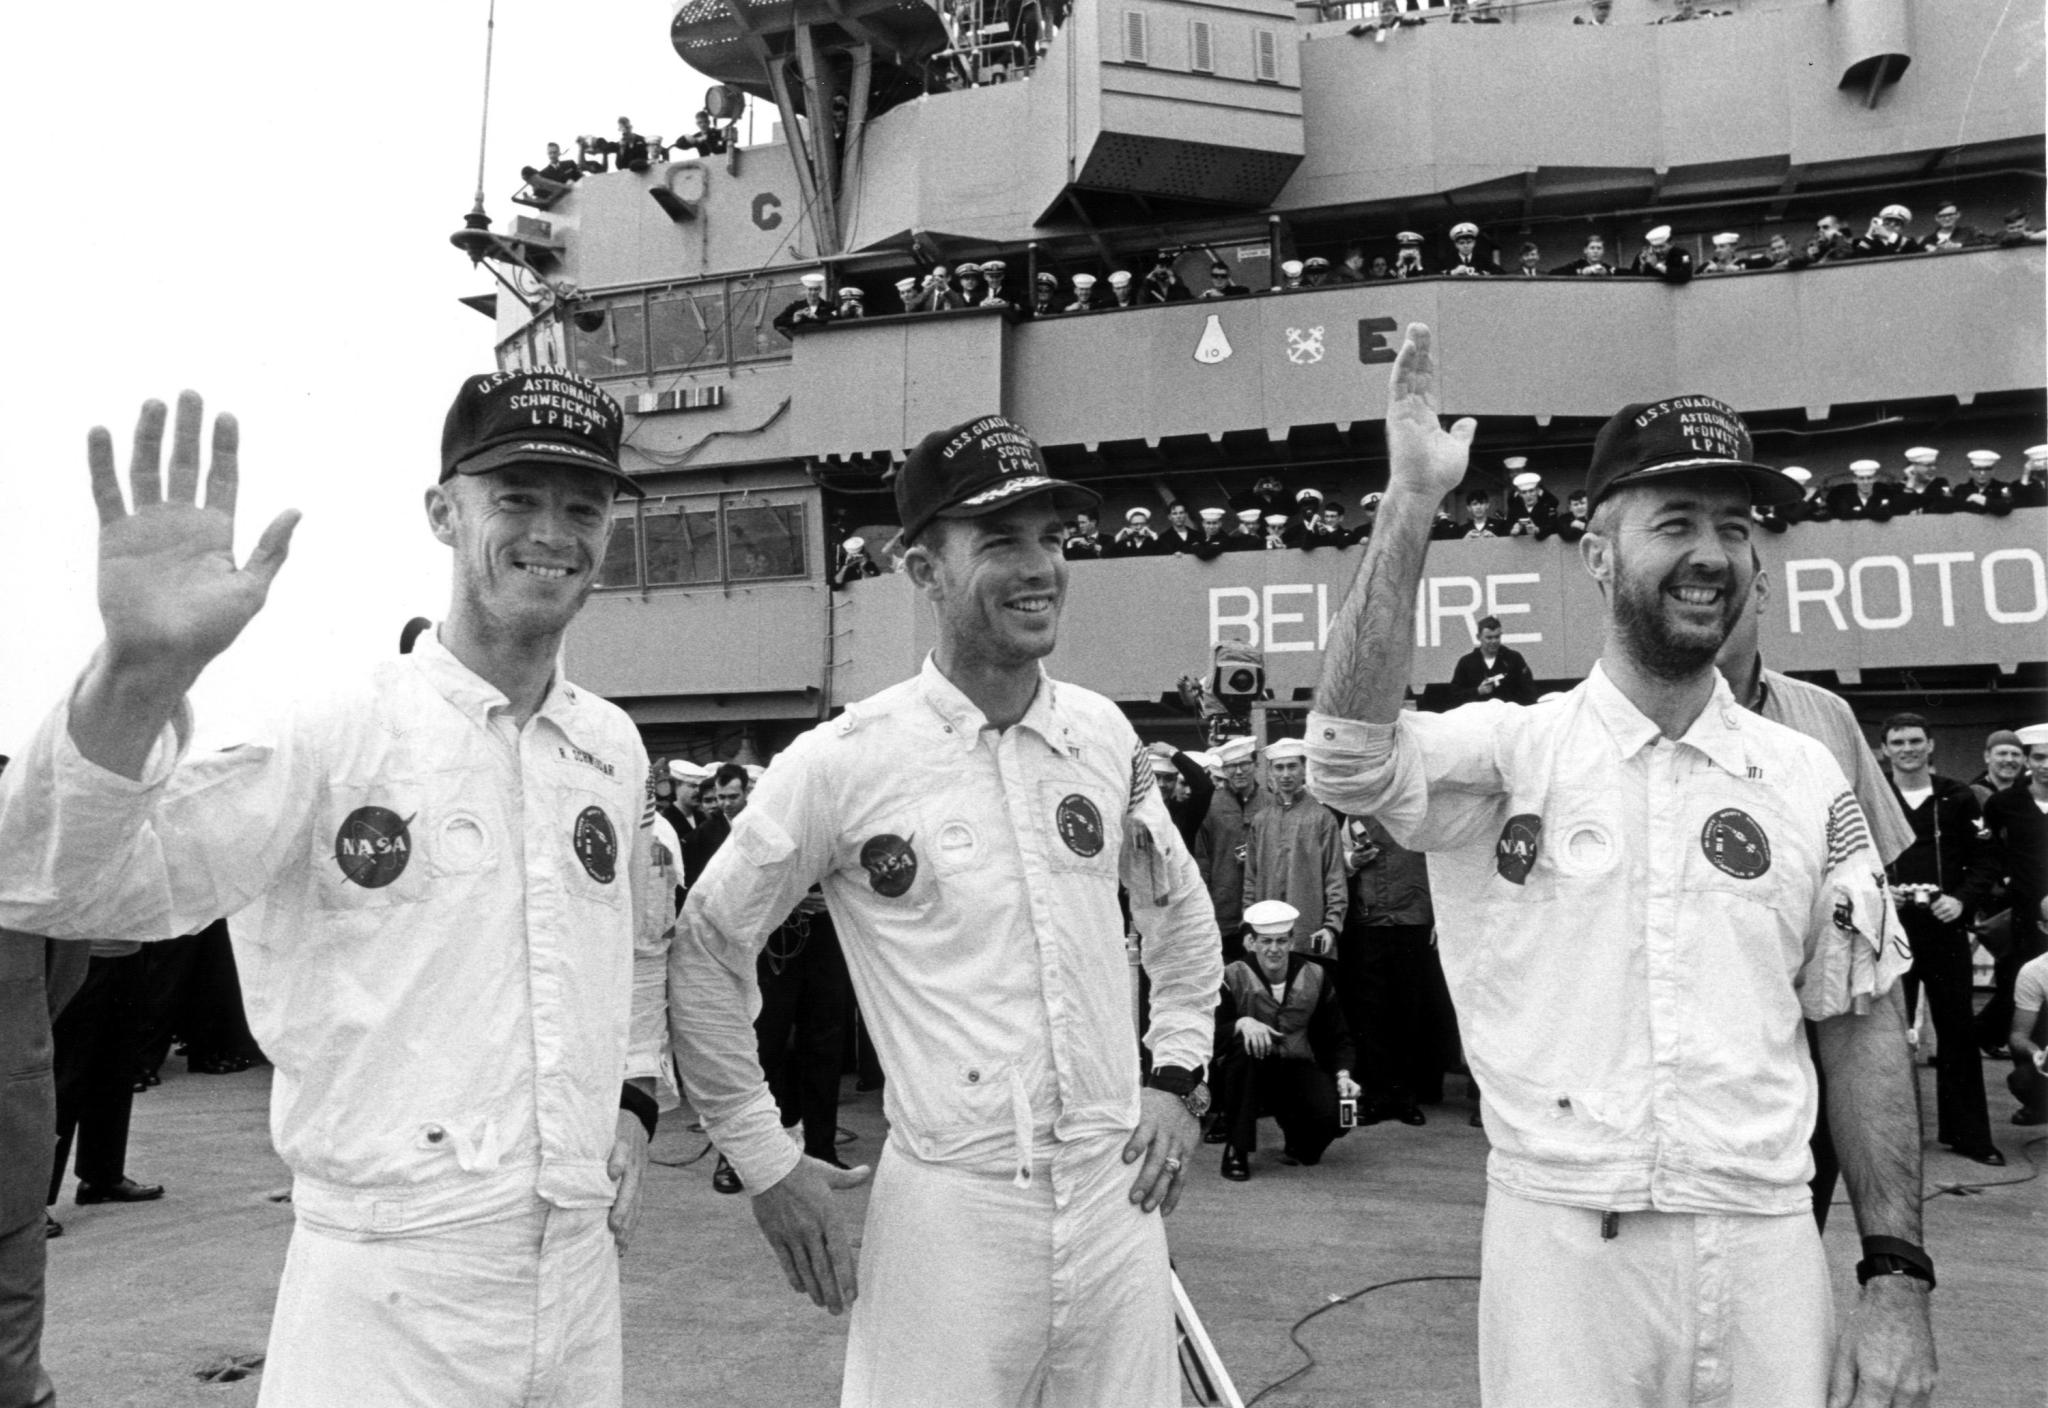 Russell Schweickart, David R. Scott and James McDivitt, wave to well-wishers aboard the recovery ship at completion of Apollo 9.